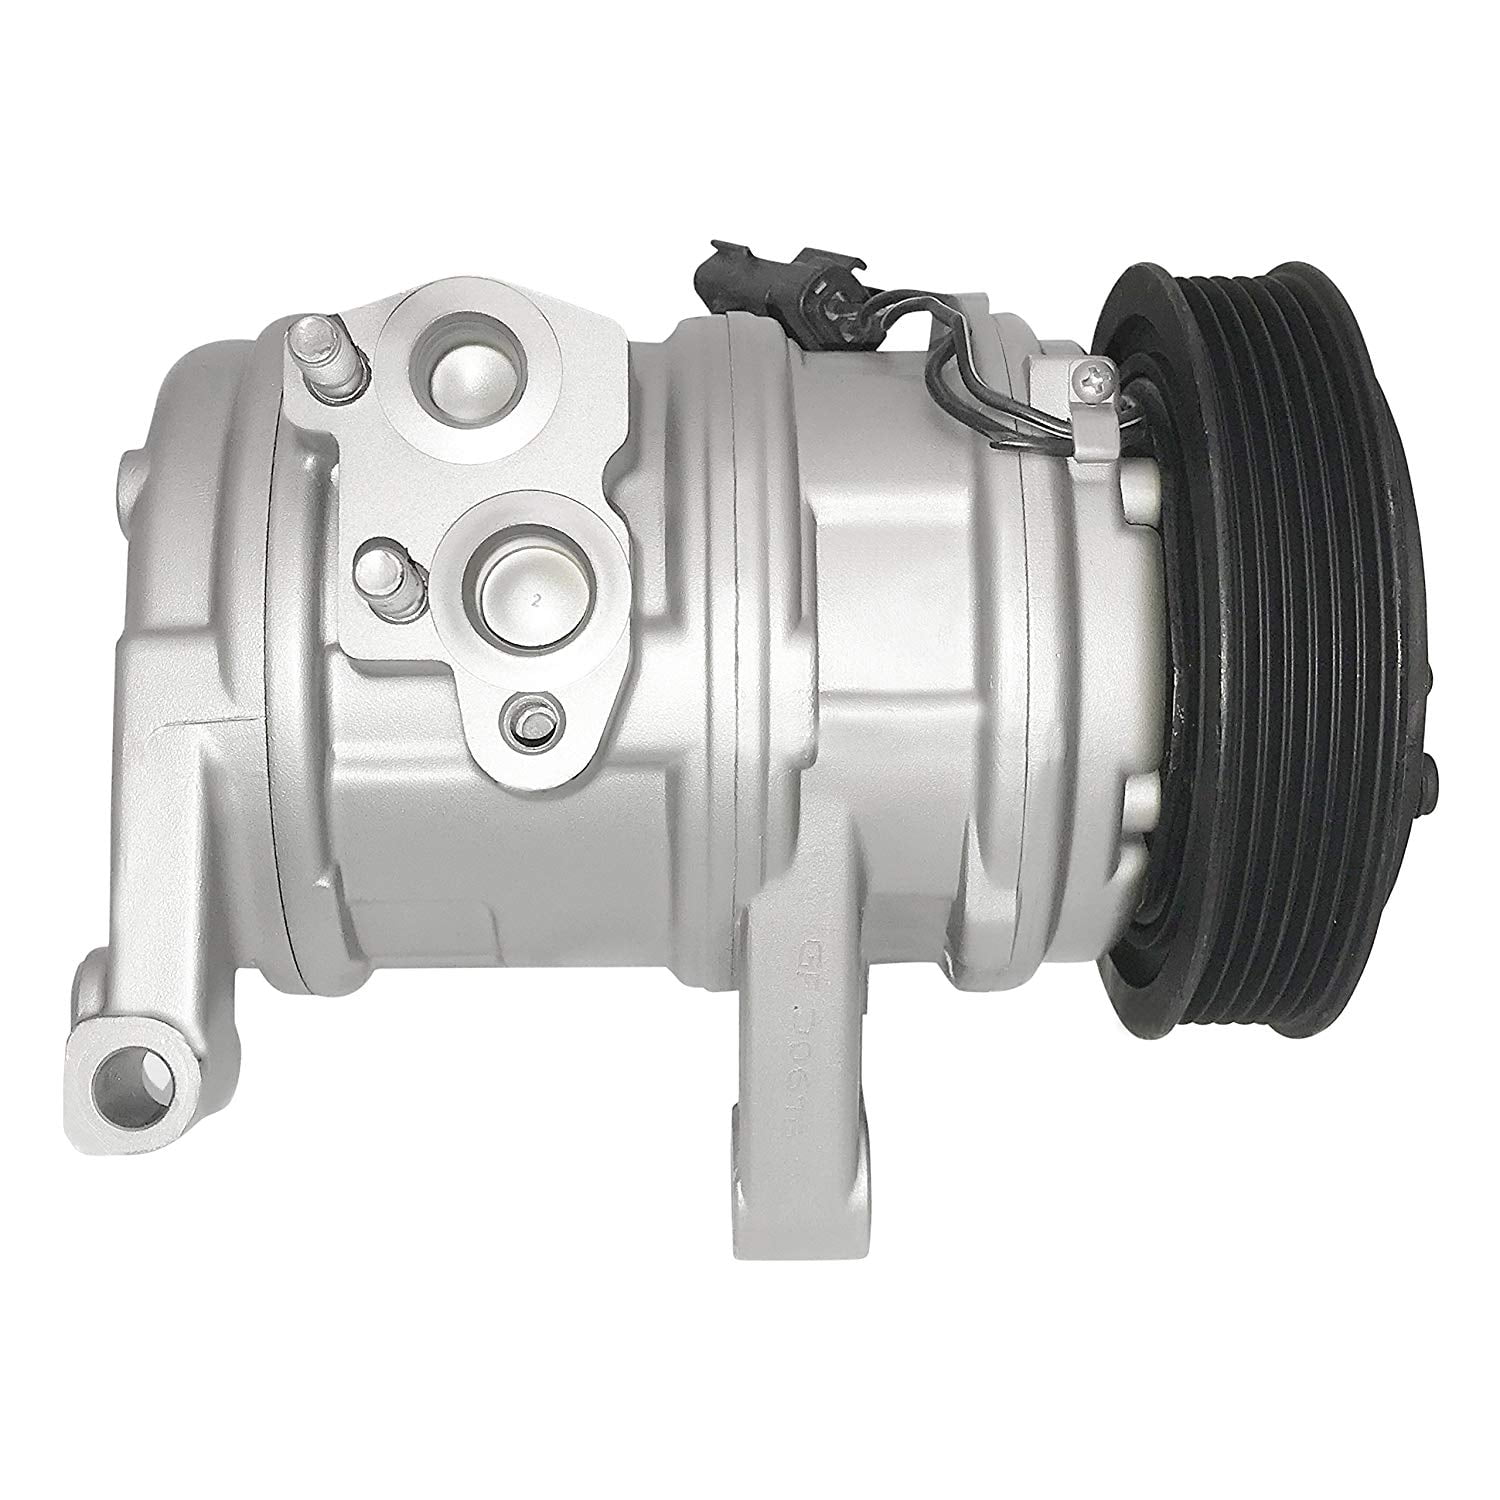 2005-2007 Grand Cherokee New A/C AC Compressor Kit 3.7 / 4.7L only 